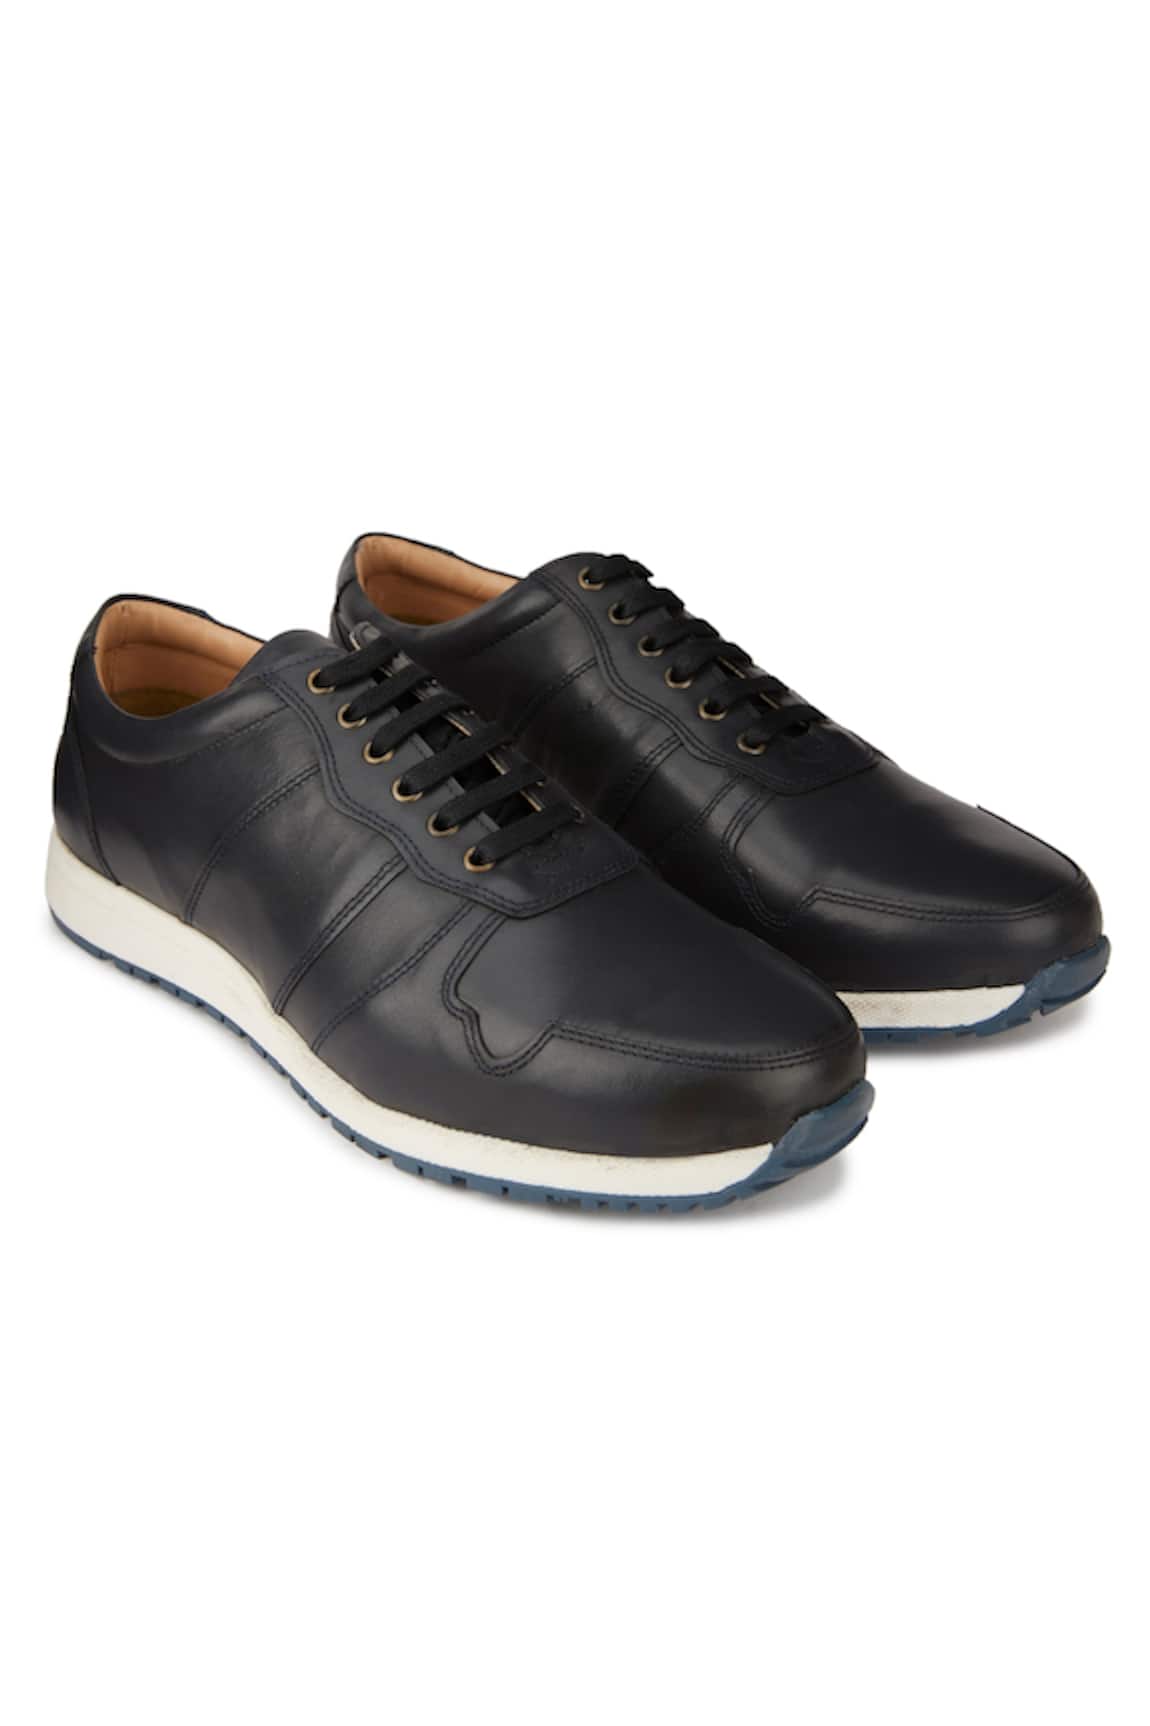 Hats Off Accessories Leather Lace-Up Sneakers